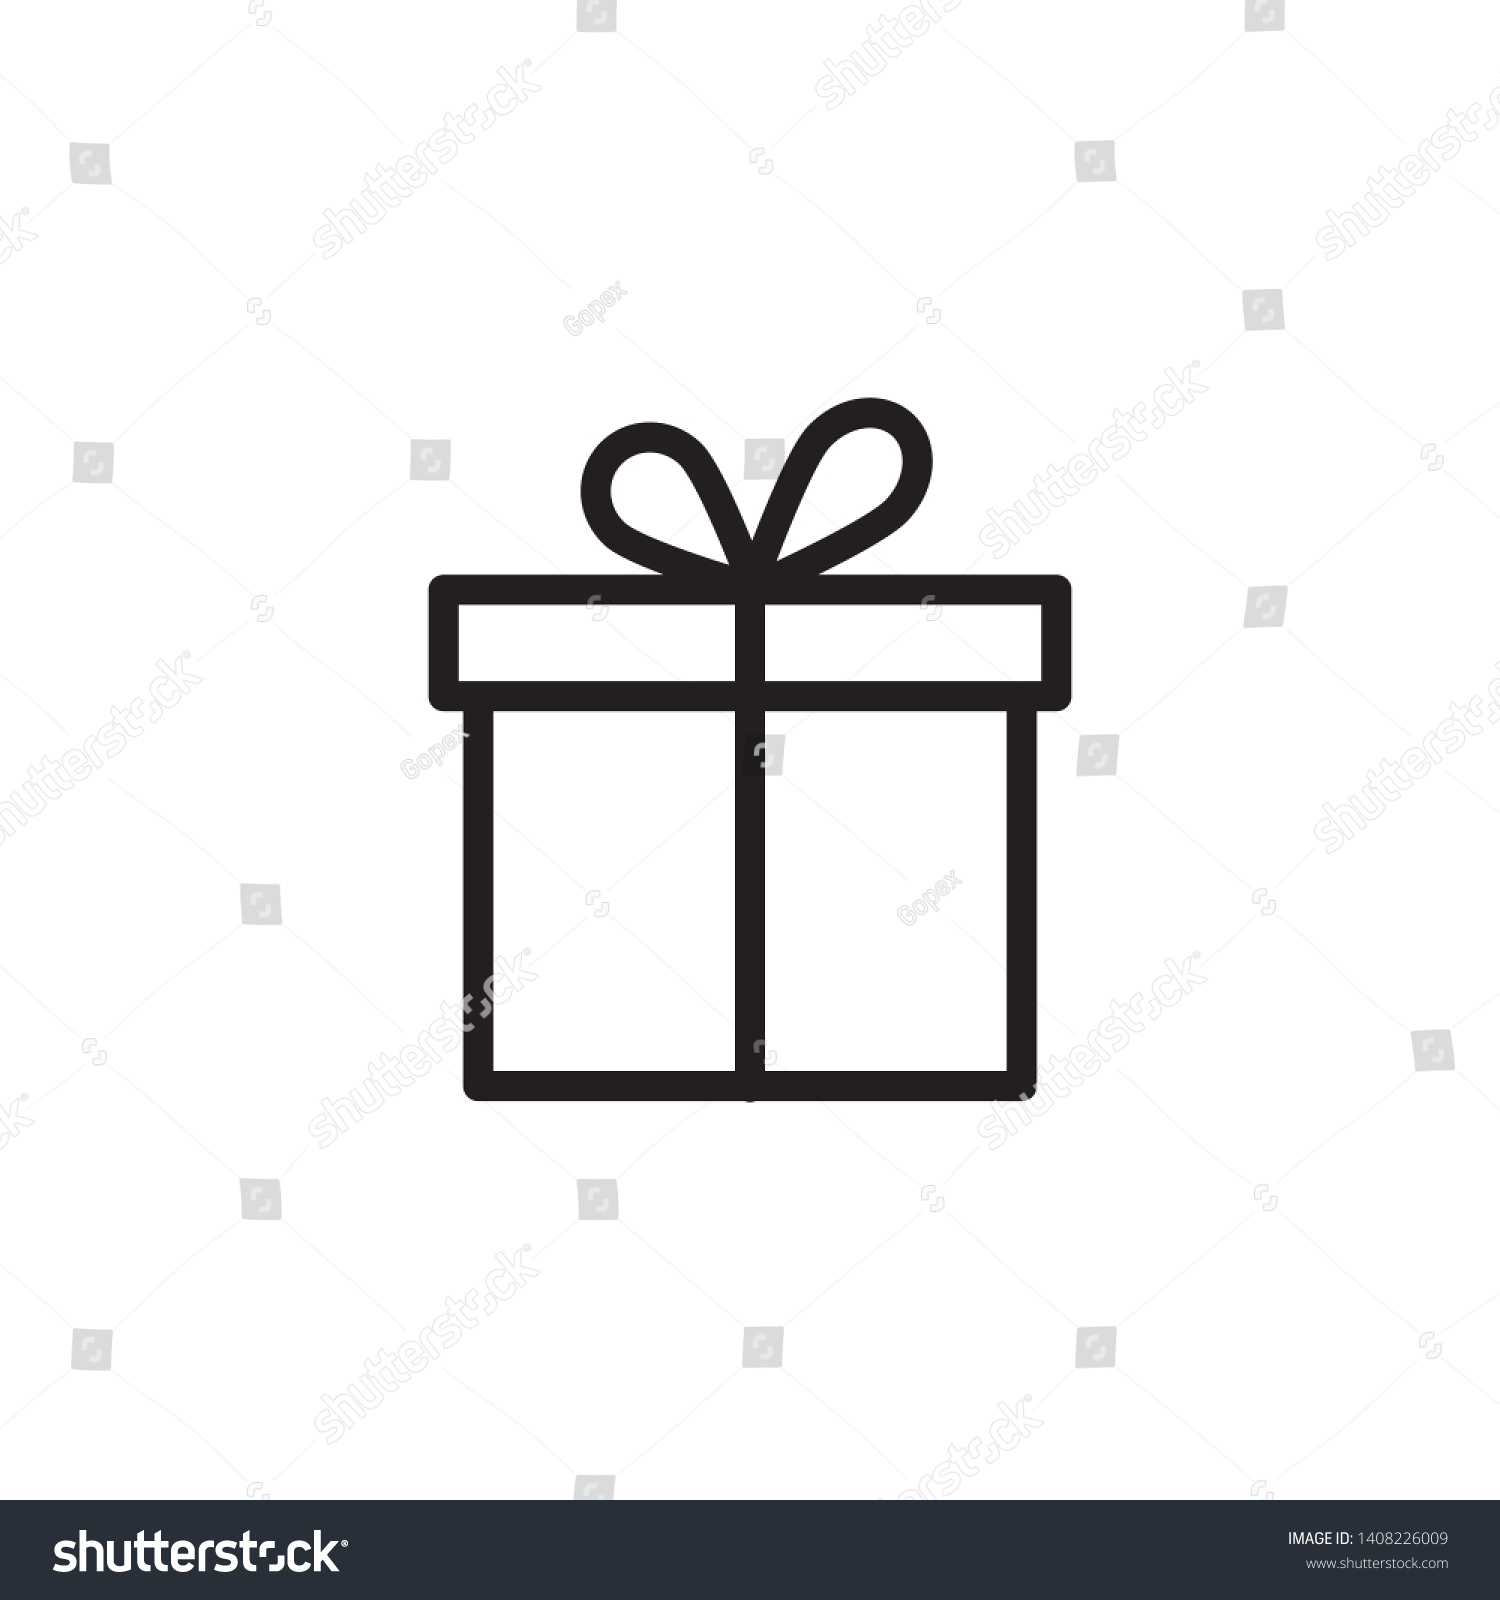 Gift Box icon design template. Trendy style, vector eps 10 #1408226009